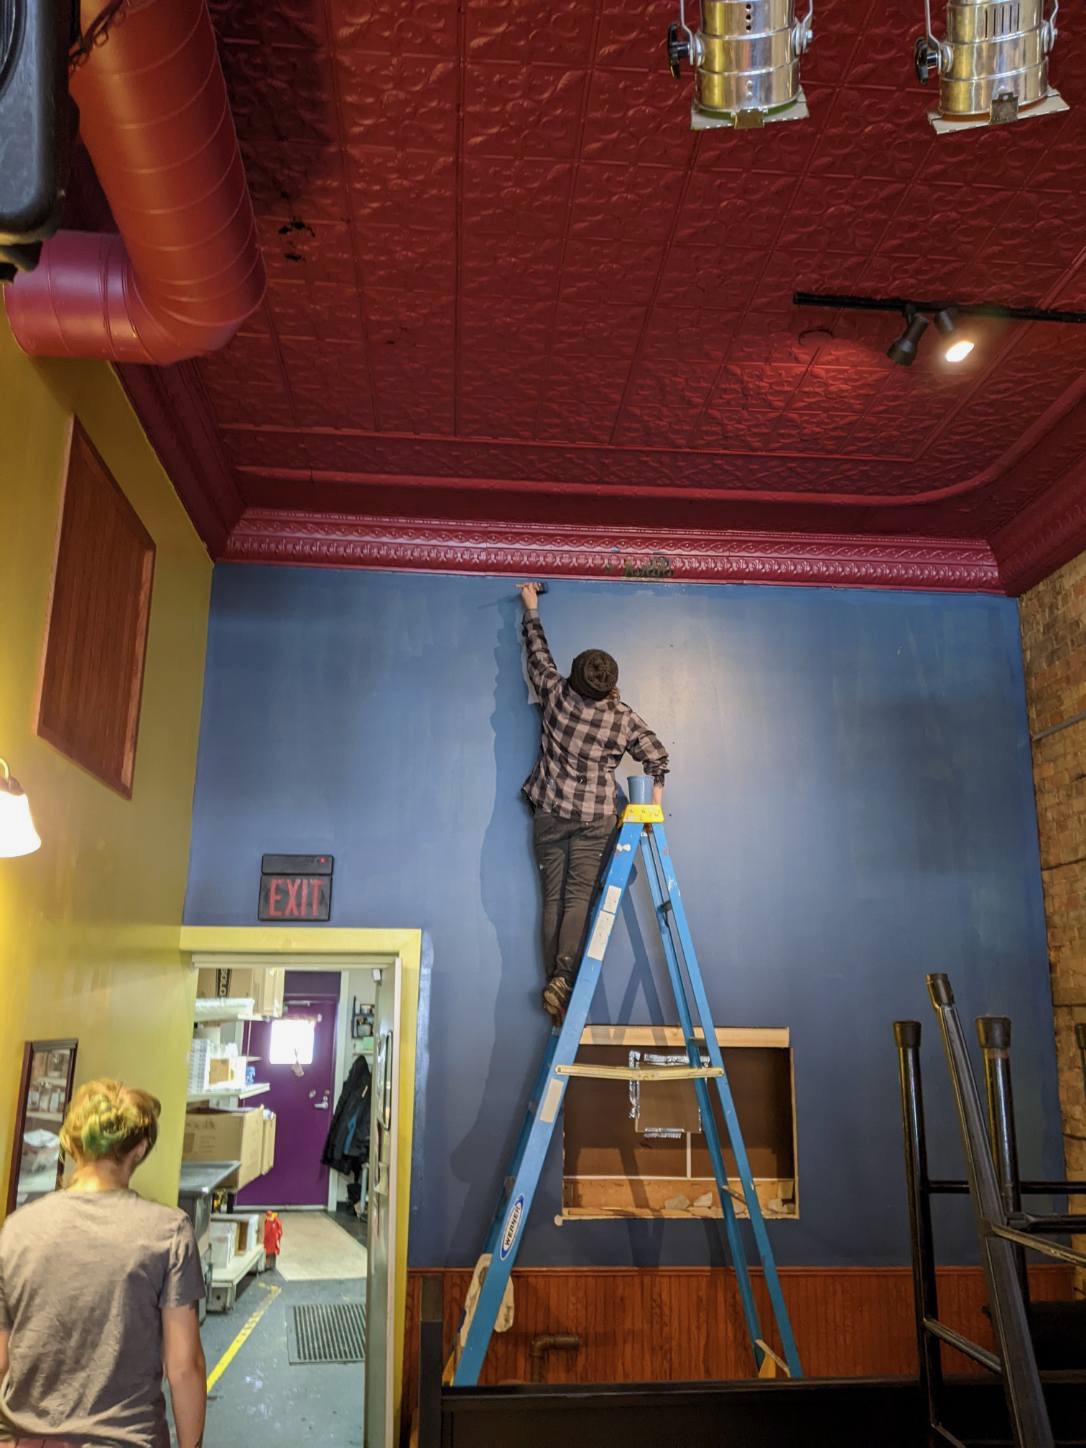 Contributed photoThe Local Blend renovation project Jan. 1 - 8. Owner Stacie Stone adds a fresh coat of blue on the back wall